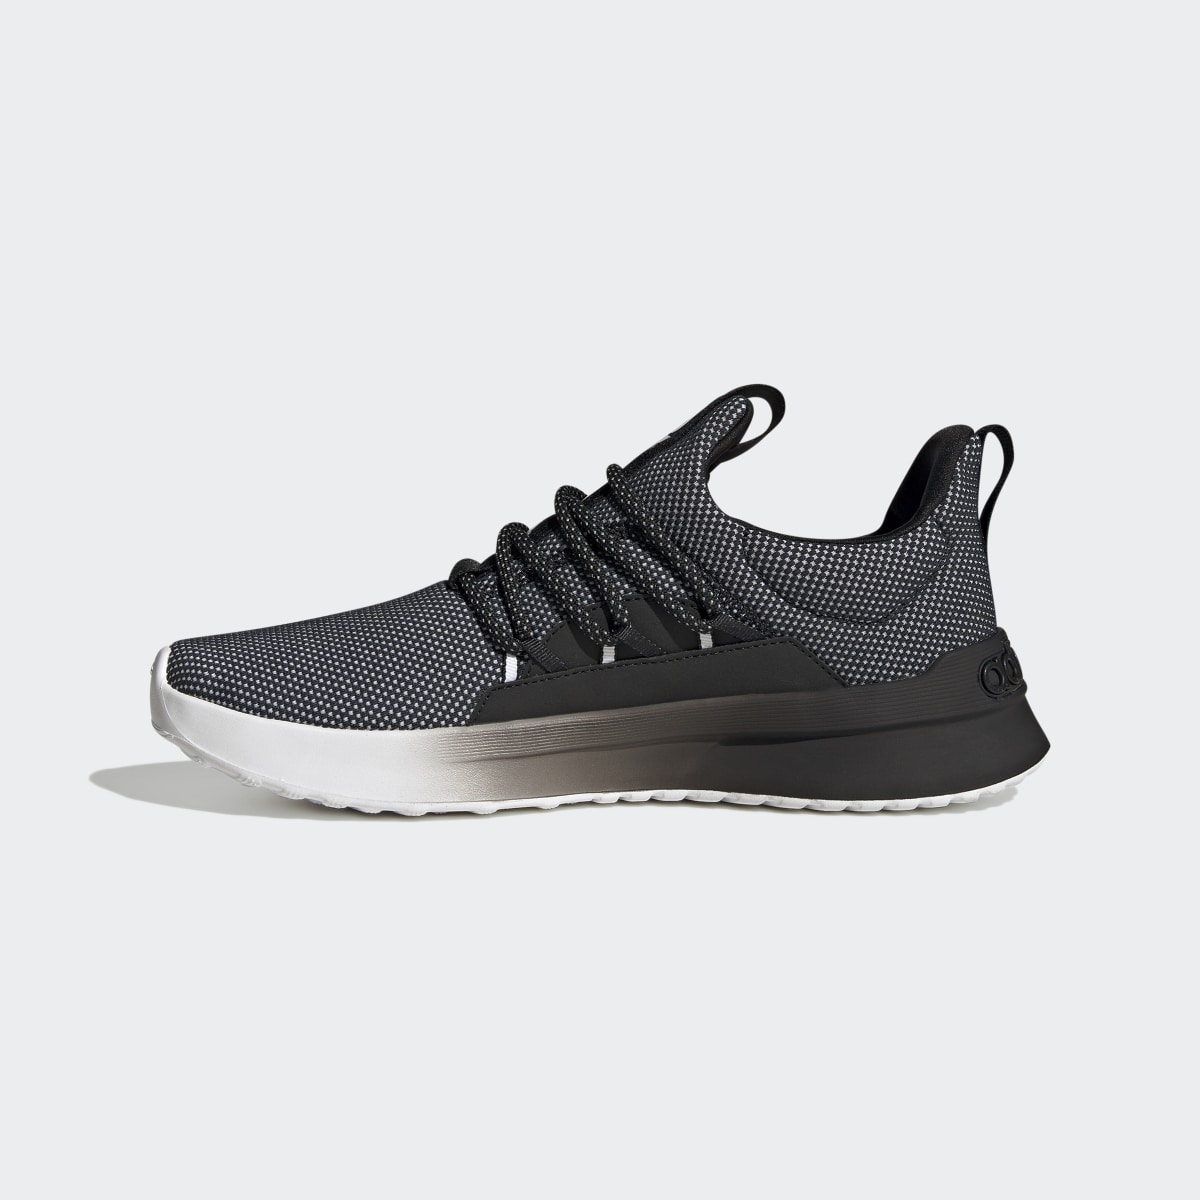 Adidas Lite Racer Adapt 5.0 Shoes. 7